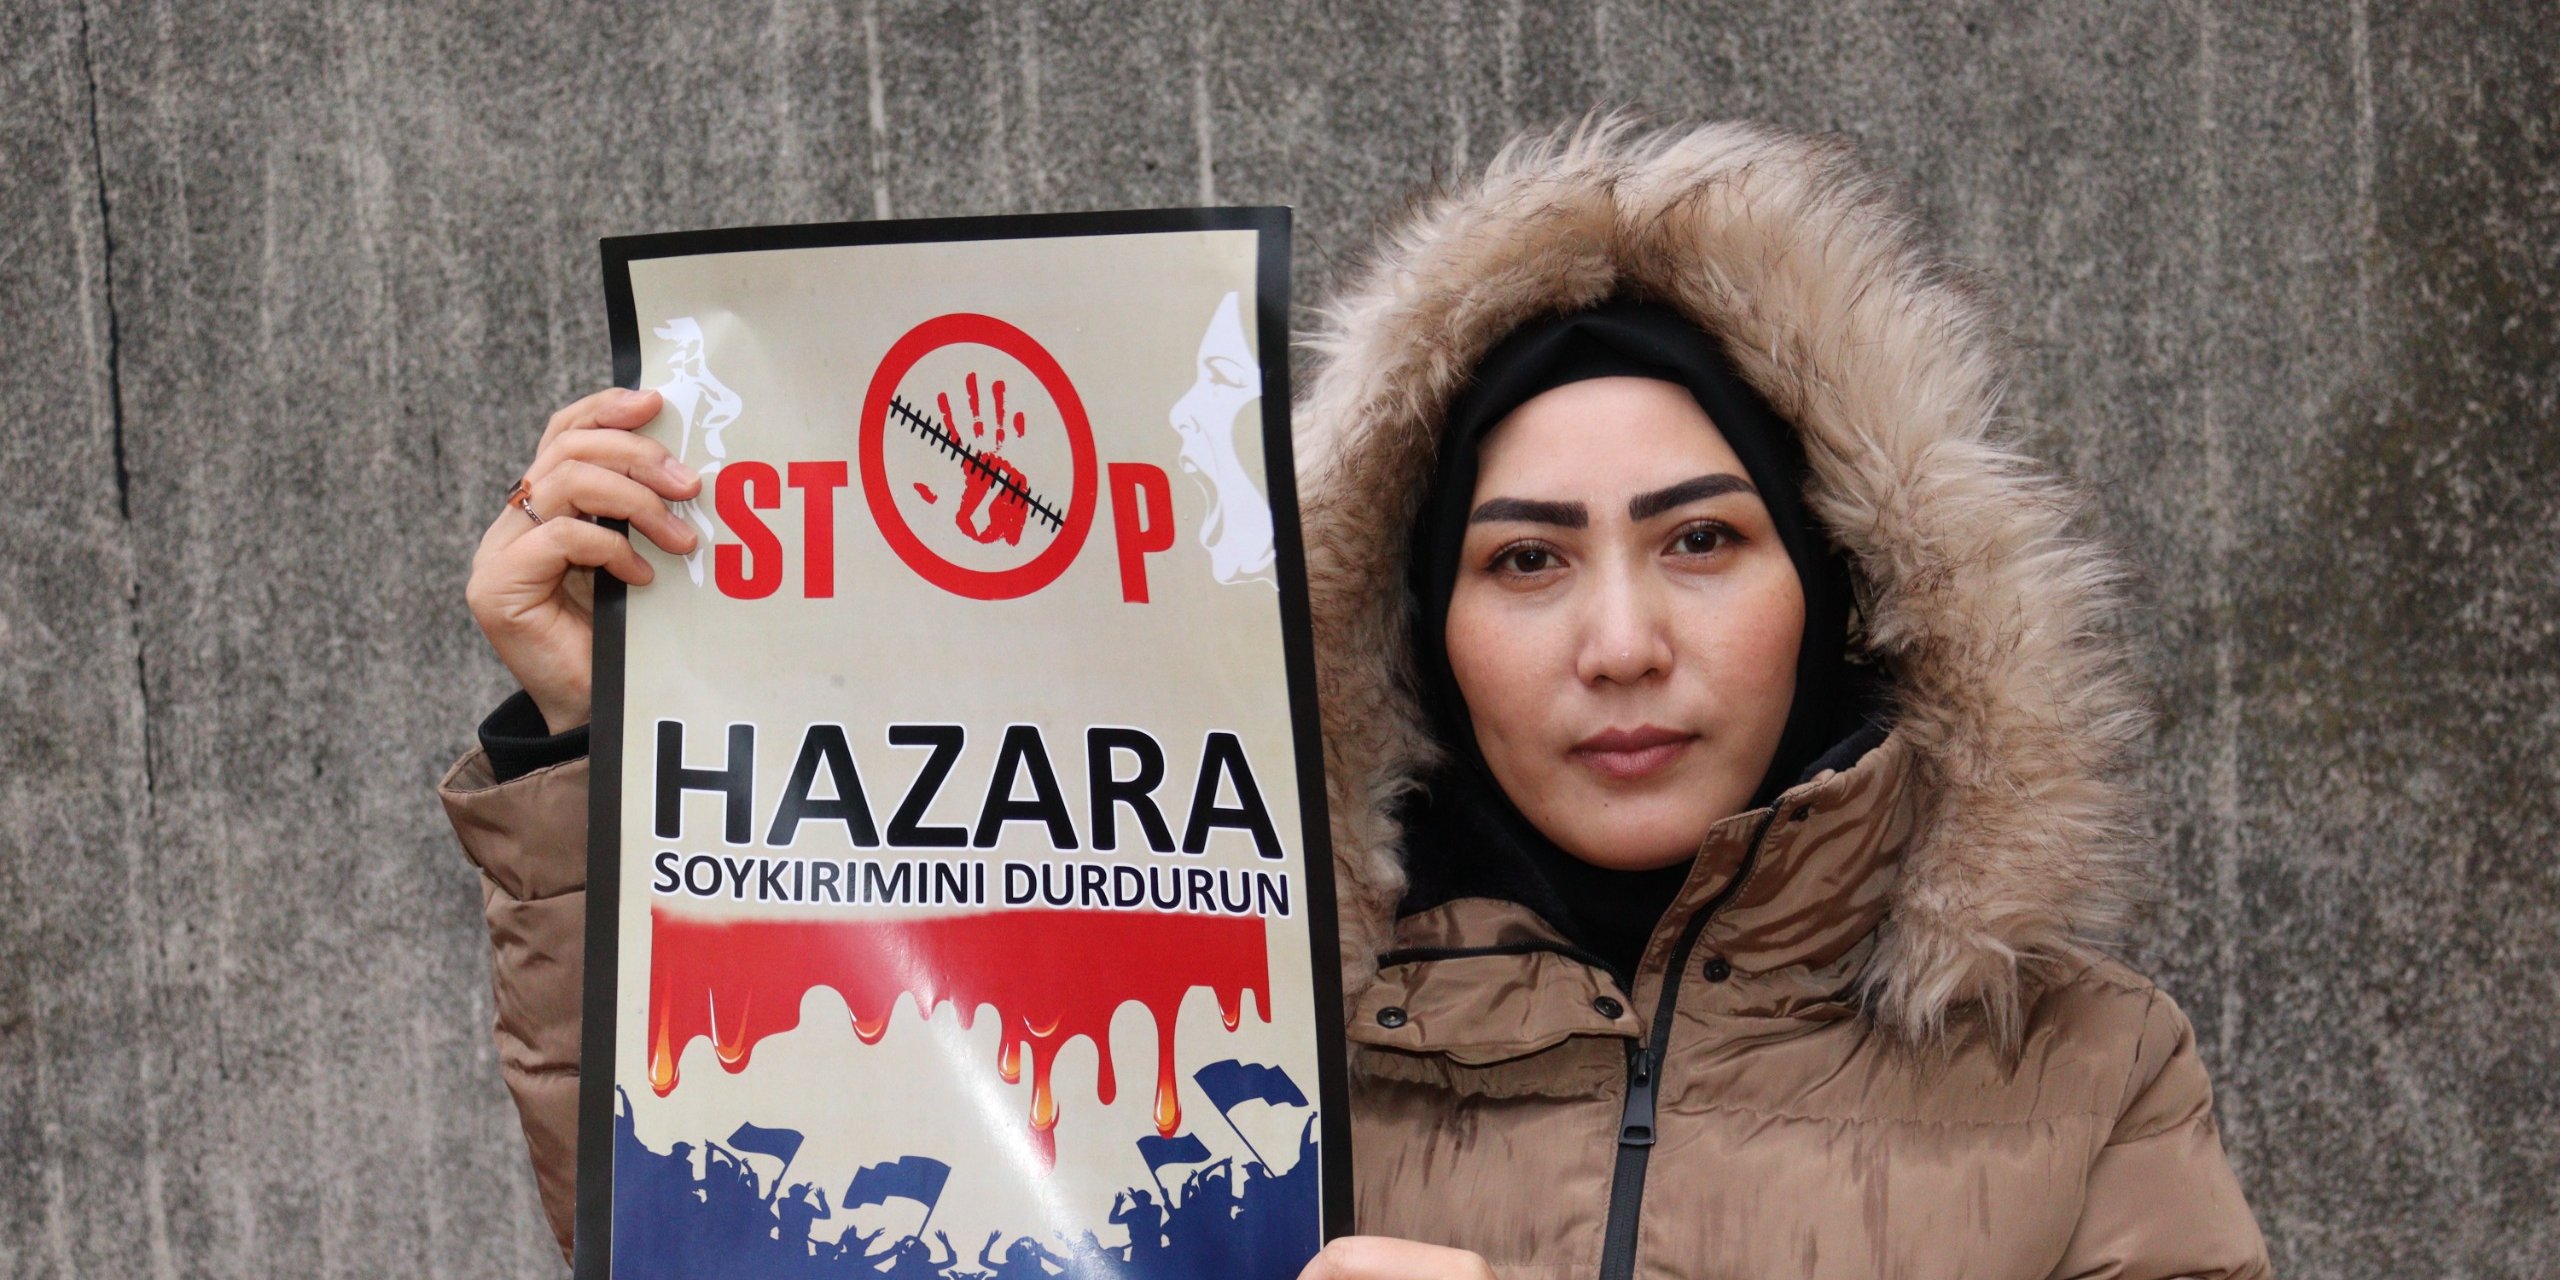 Trabzon Rally Denounces Hazara Genocide and Taliban Abductions: Global Appeal for Action